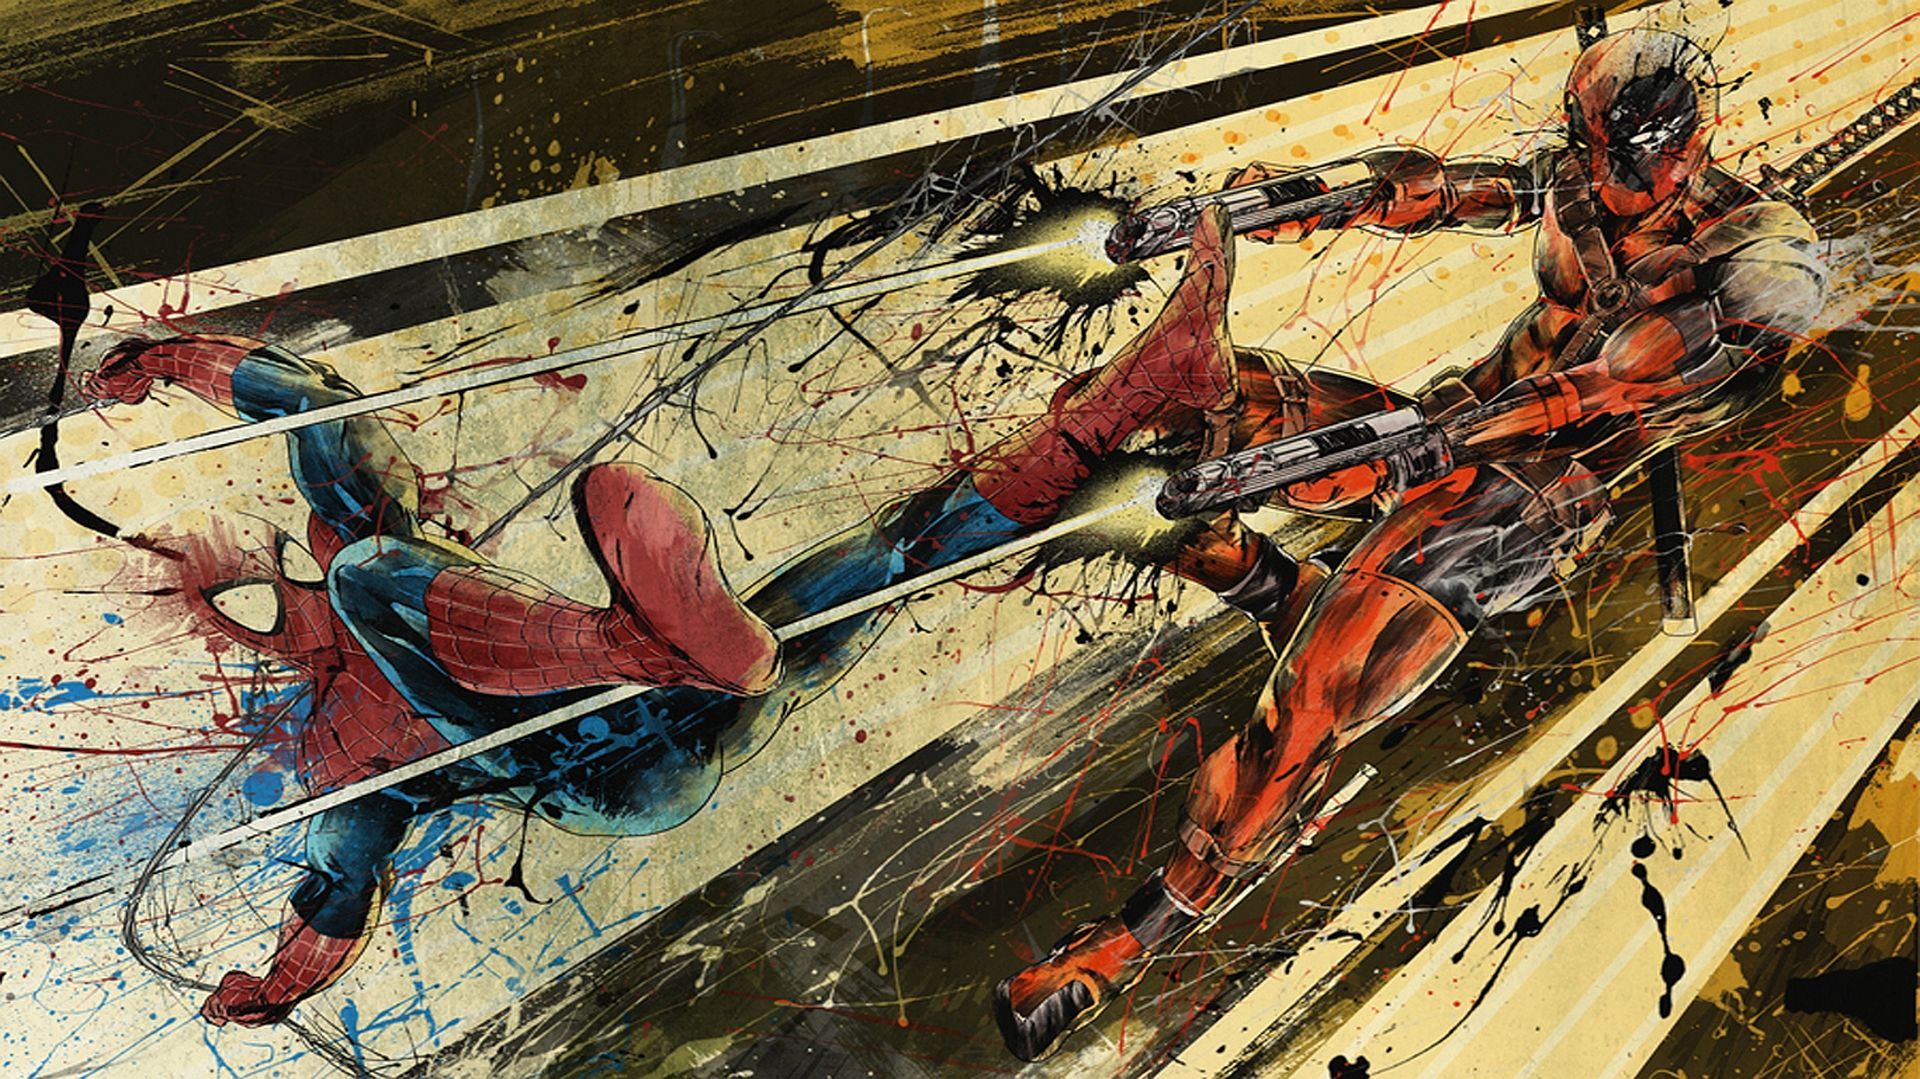 1 Spiderman Vs Deadpool HD Wallpapers | Backgrounds - Wallpaper Abyss